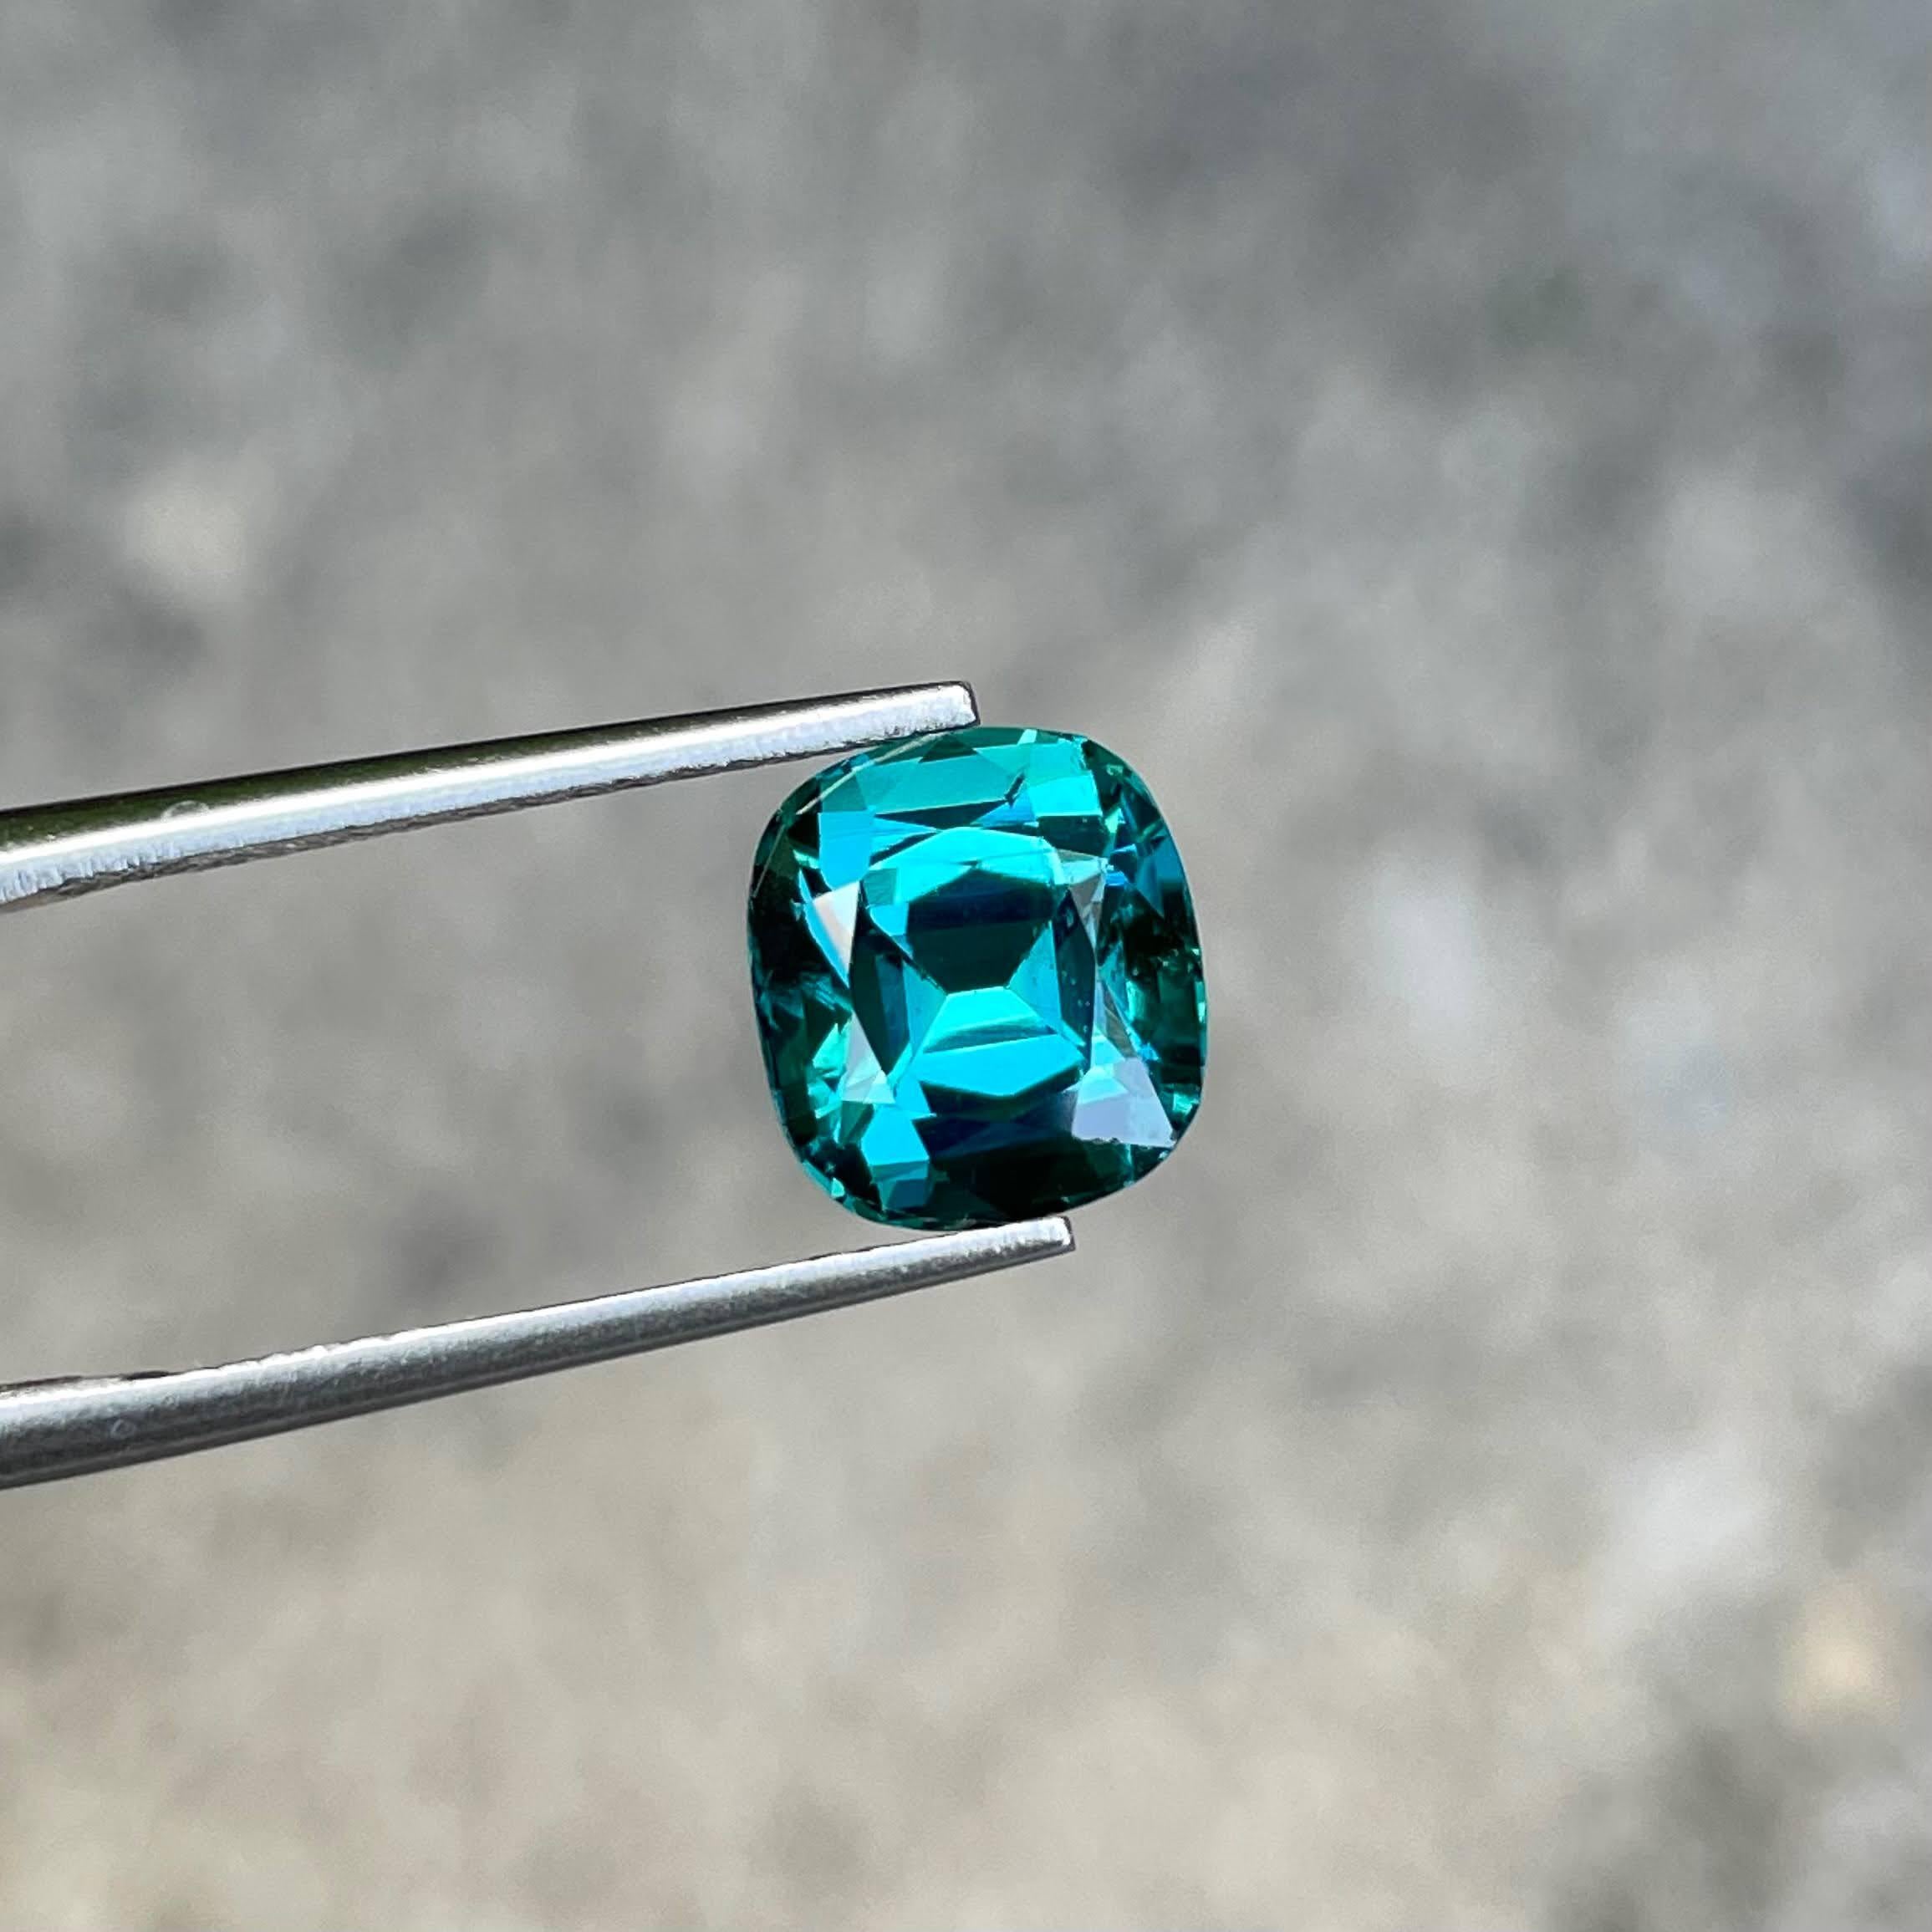 Weight 3.55 carats 
Dimensions 8.32x9.25x6.70 mm
Treatment None
Clarity Eye Clean
Origin Afghanistan
Shape Cushion
Cut Step Cushion




The captivating allure of a 3.55-carat Lagoon Blue Tourmaline takes center stage, showcasing its exquisite beauty